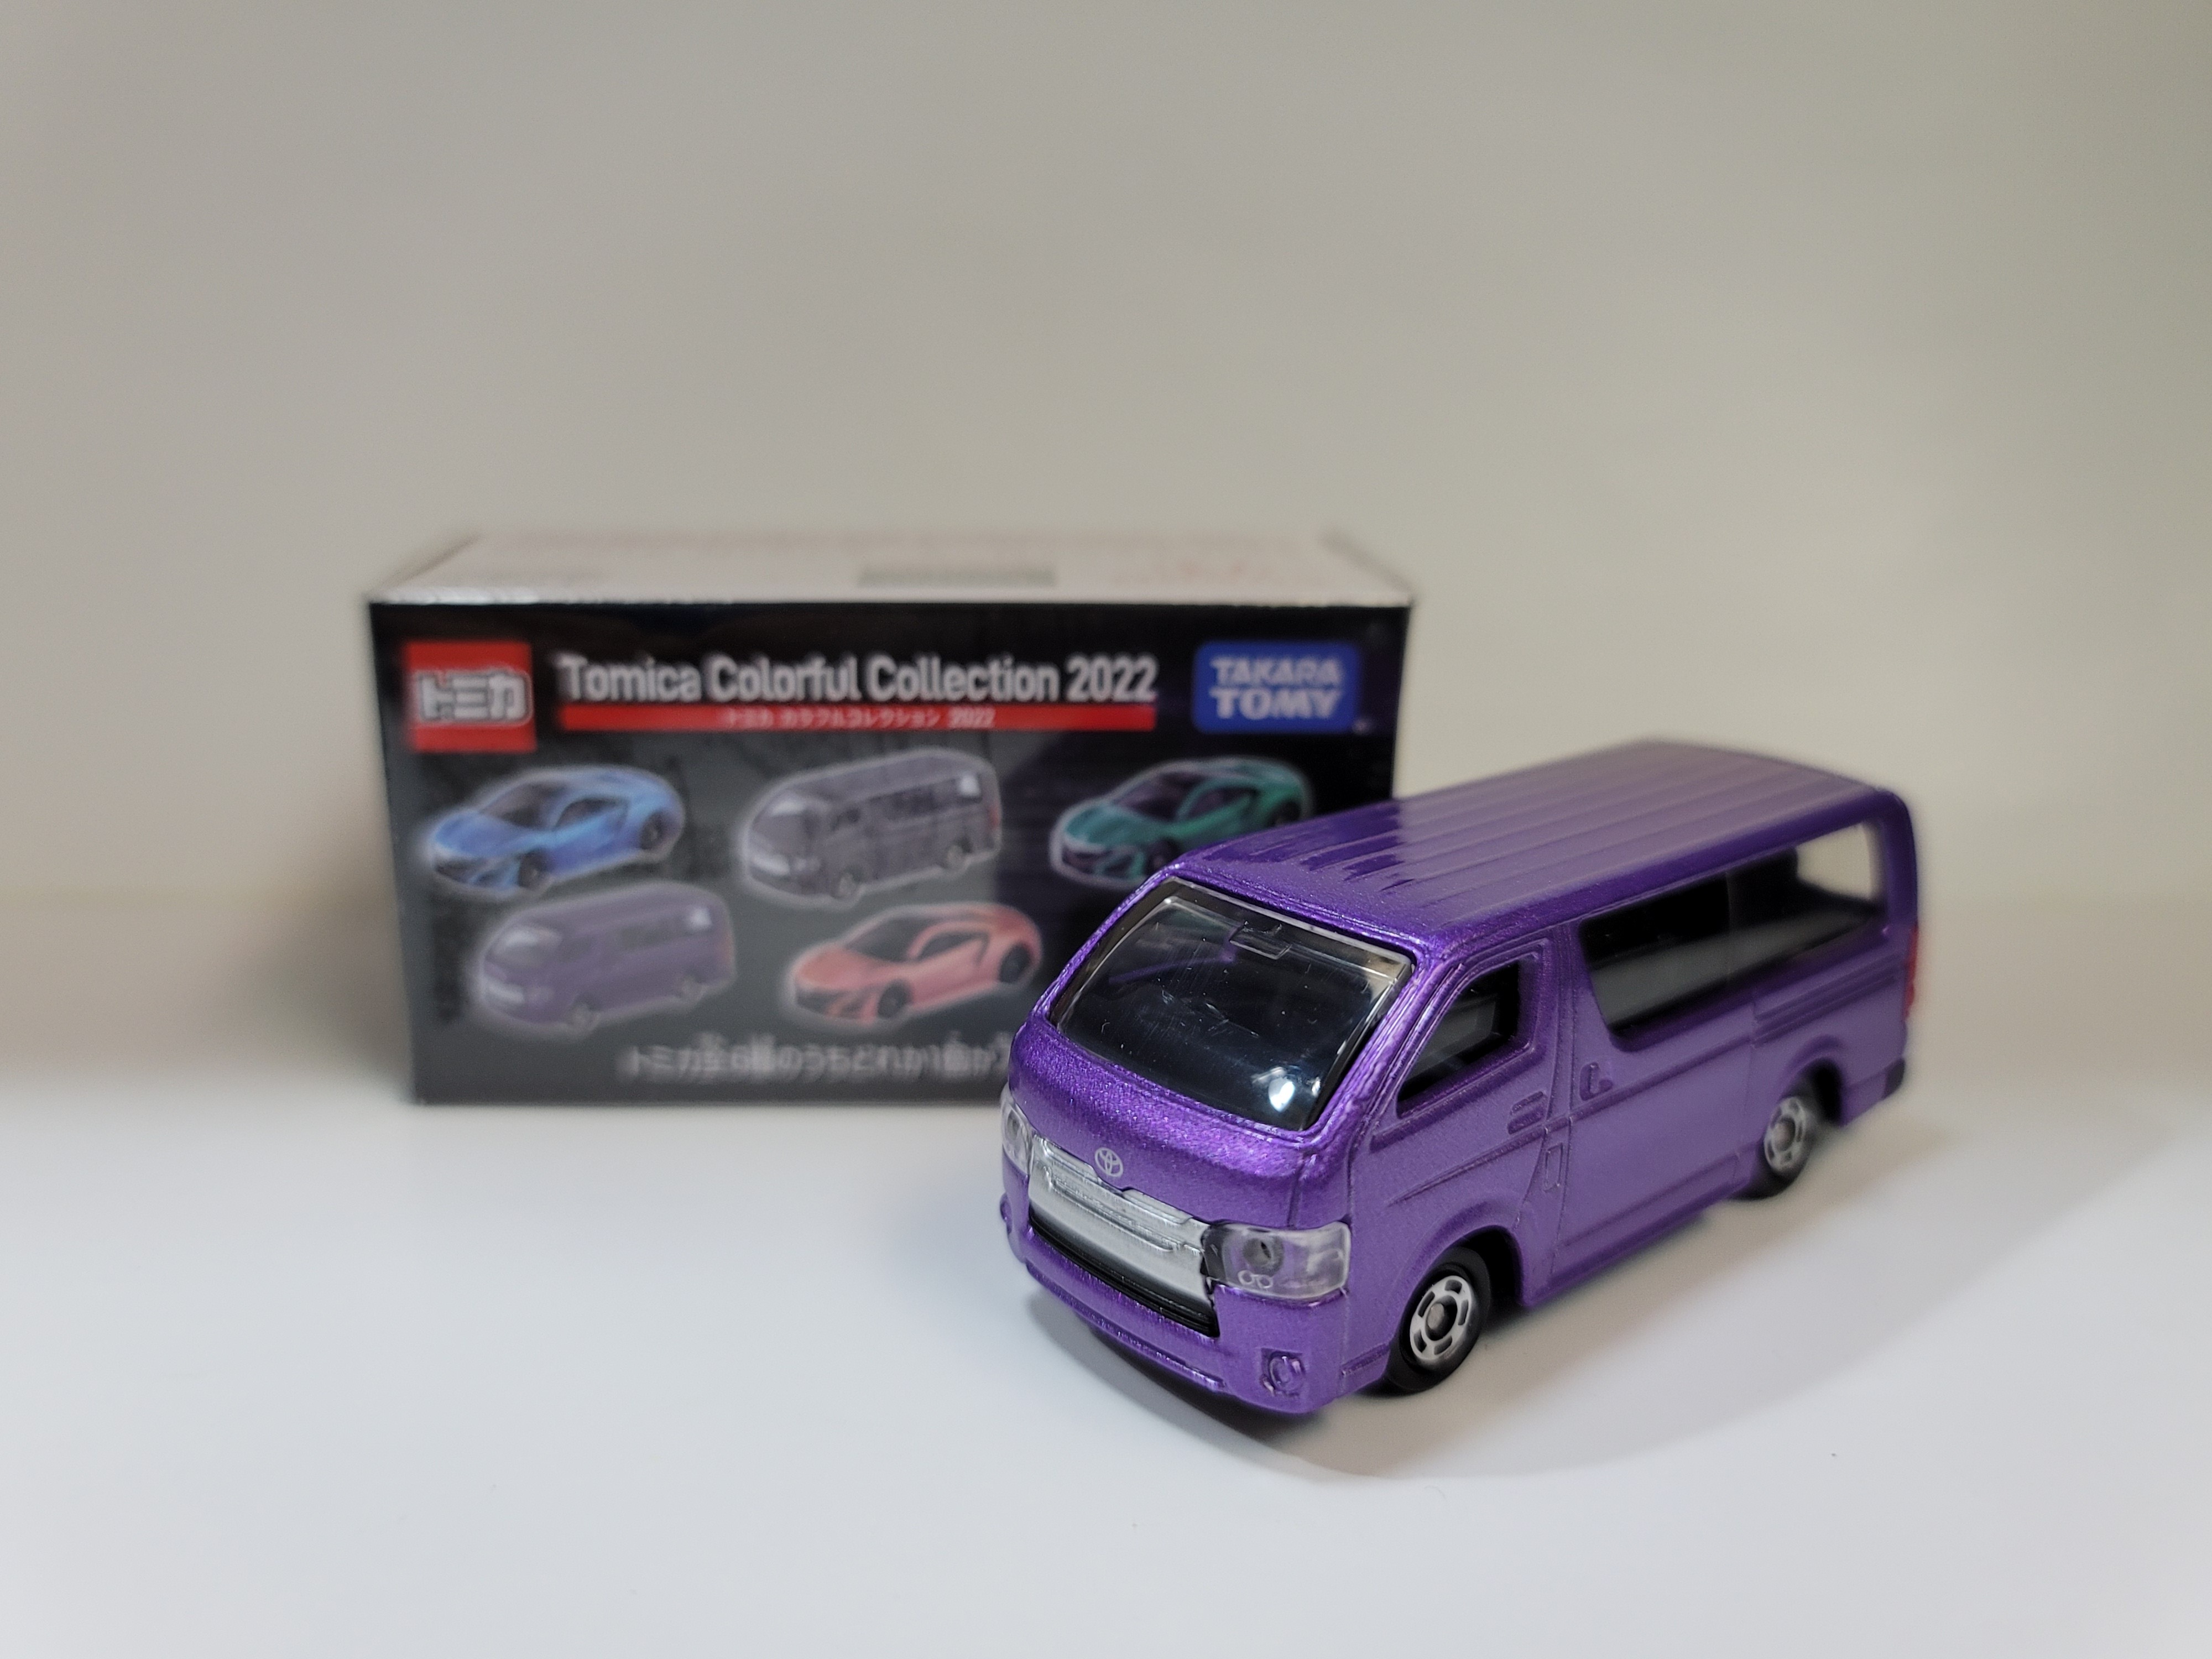 Tomica 7-11 Original Tomica colorful collection (Toyota